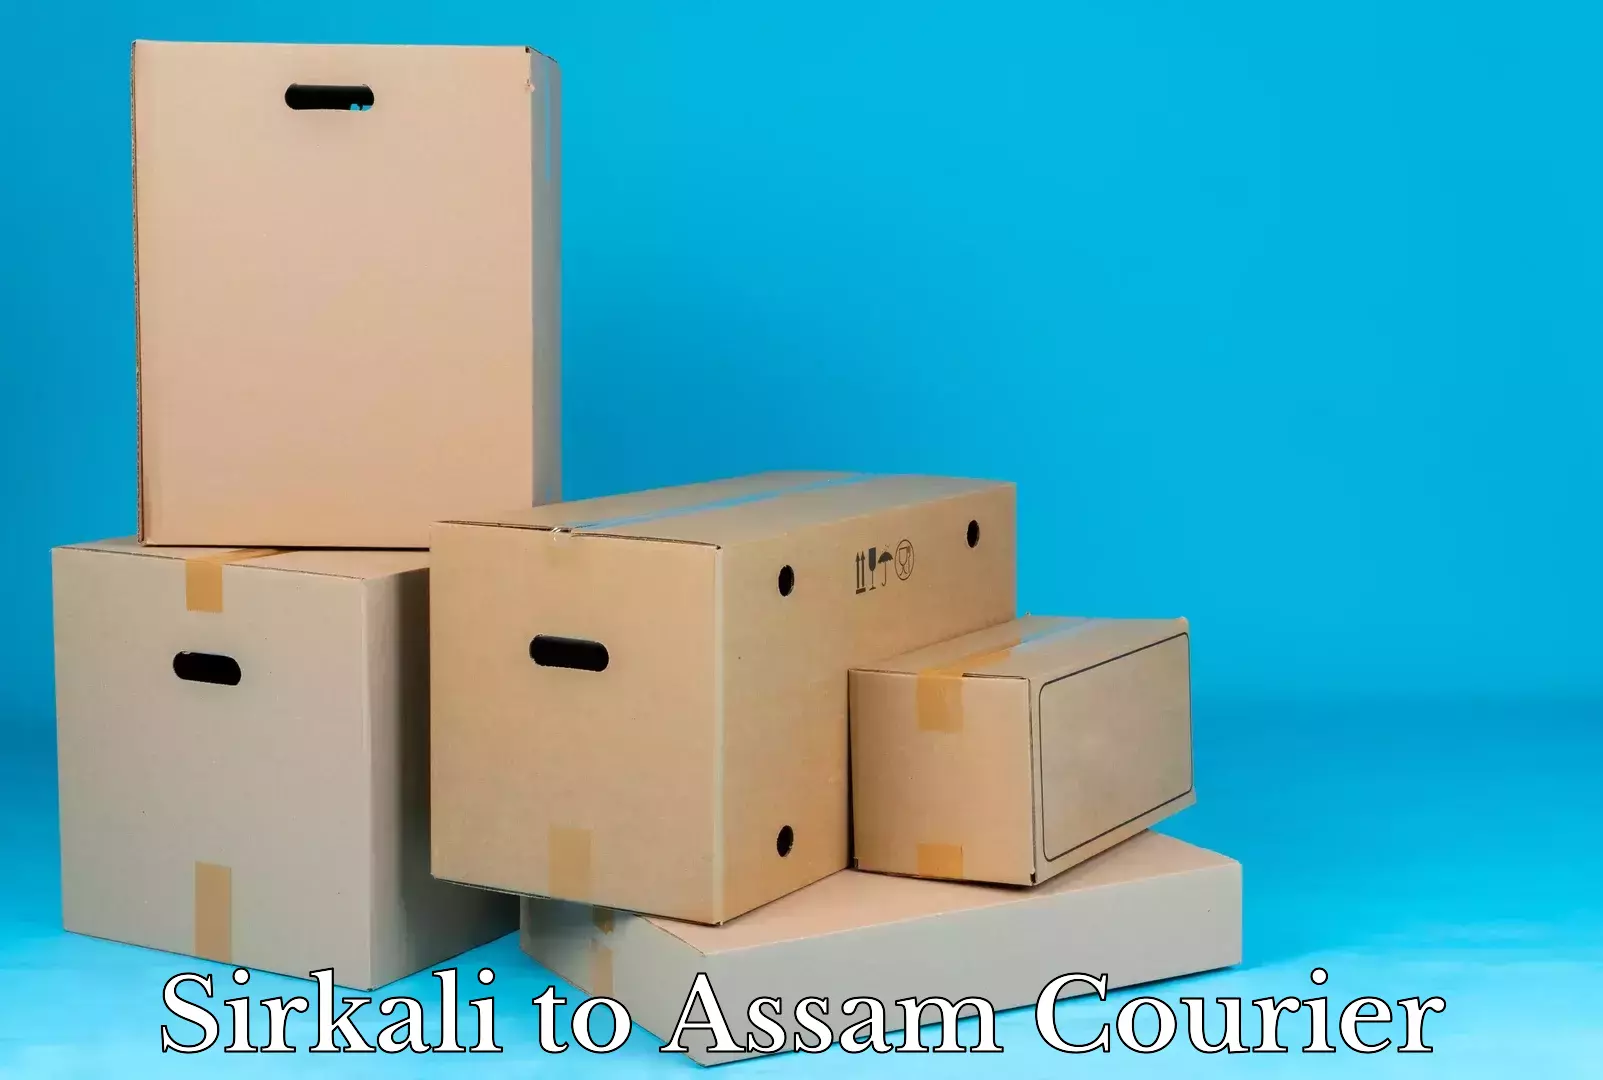 Hassle-free relocation in Sirkali to Nagaon